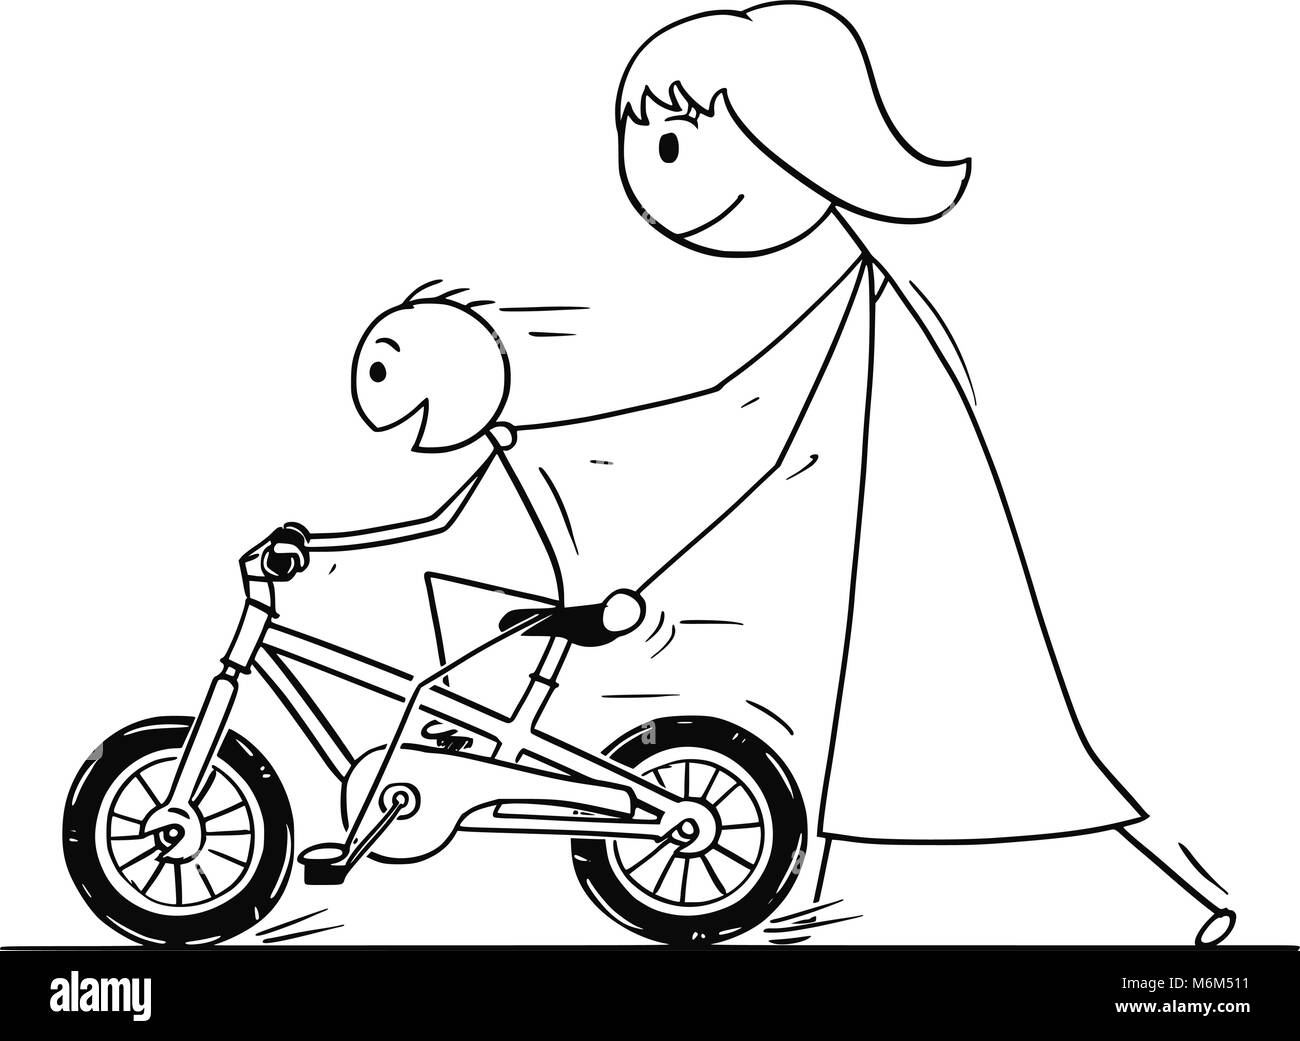 Cartoon of Mother and Son Learning to Ride a Bike or Bicycle Stock Vector